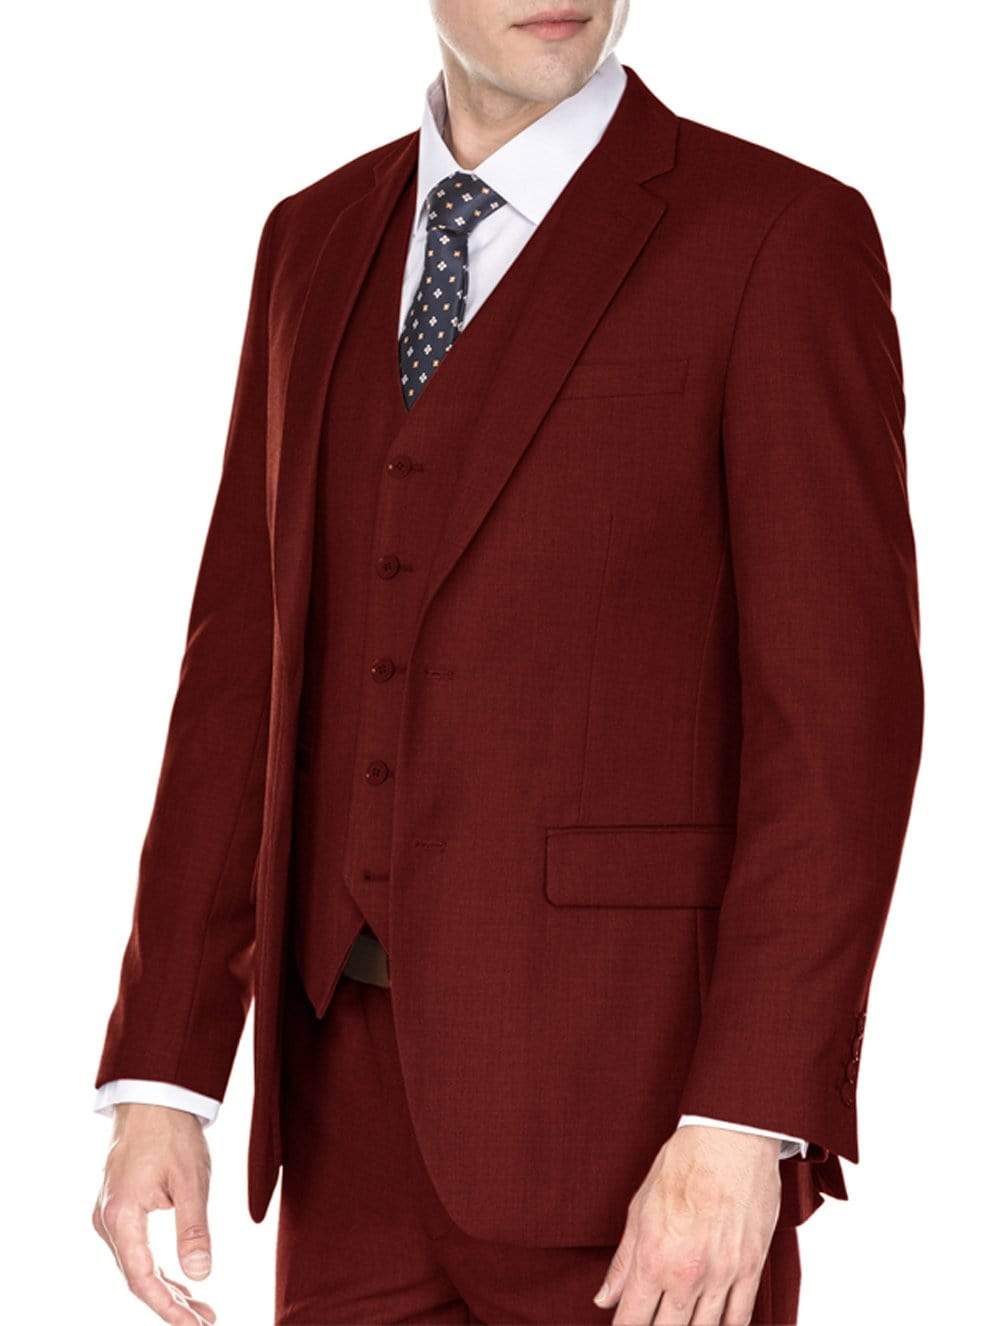 Men Suit, Man Suit, Maroon 2 Piece Wedding Groom Wear Formal Fashion Party  Wear One Button Slim Fit Suit Gift for Men Christmas Day. - Etsy